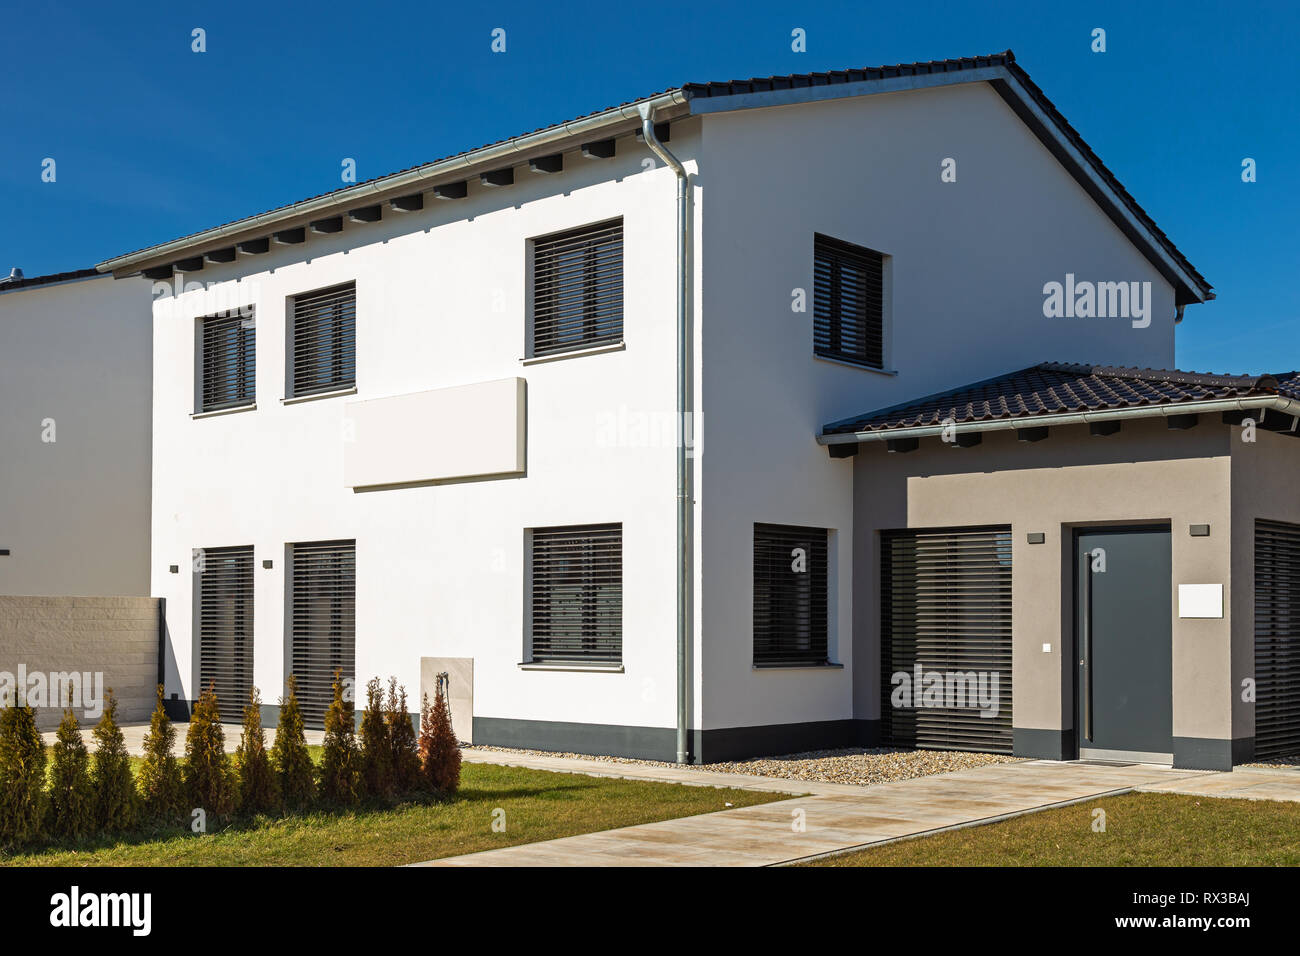 New construction of a modern residential building Stock Photo